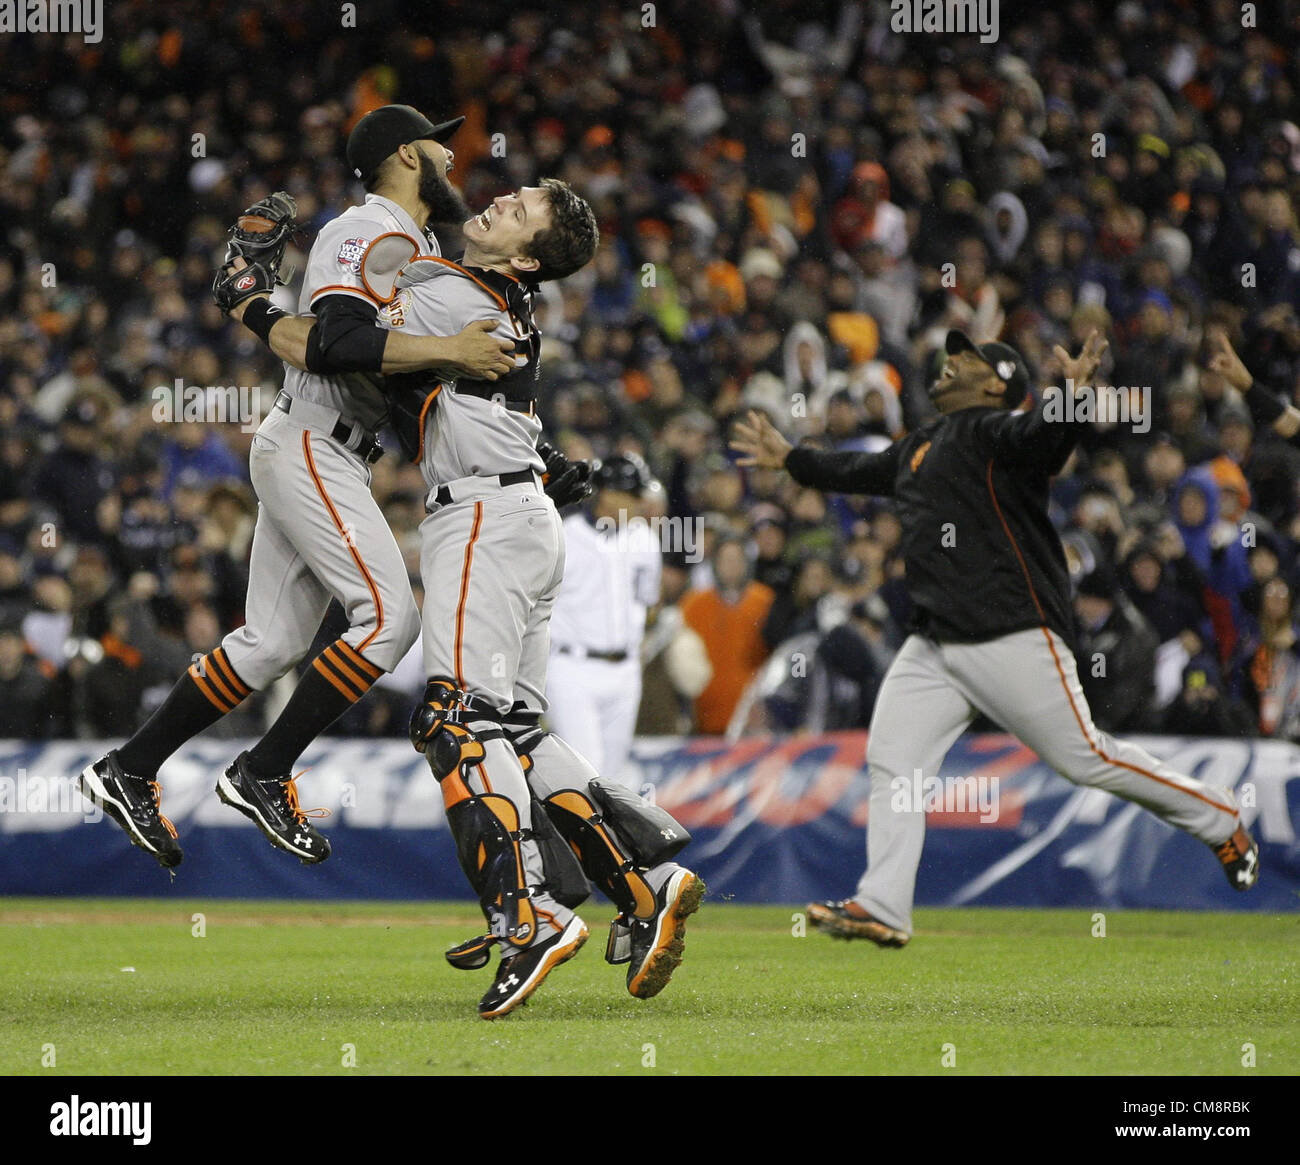 28.10.2012. Detroit, Michigan, USA. San Francisco Giants relief pitcher SERGIO ROMO and catcher BUSTER POSEY celebrate a 4-3 victory over the Detroit Tigers in the 10th inning of Game 4 of the 2012 World Series at Comerica Park. The Giants swept the series with the win Stock Photo